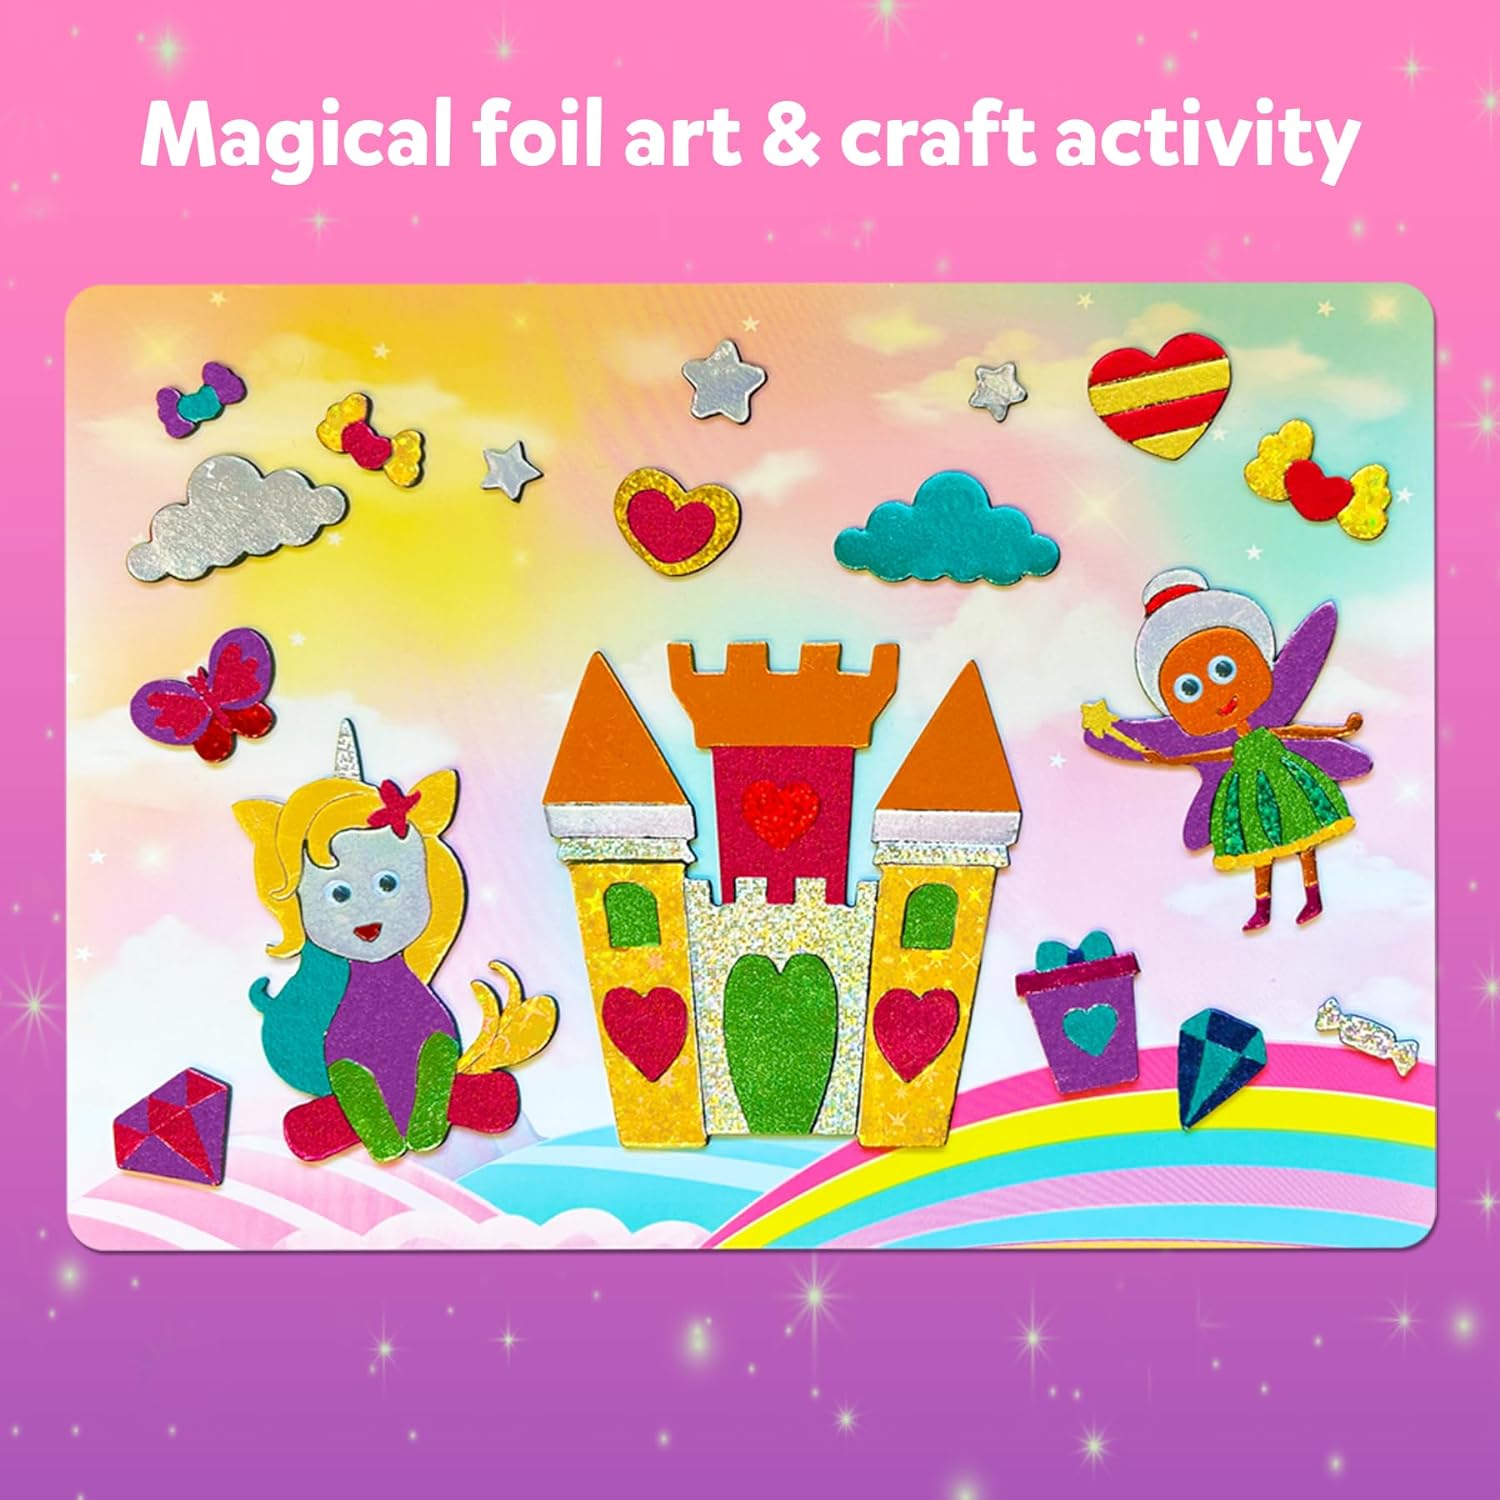 Skillmatics Art & Craft Activity - Foil Fun Unicorns & Princesses, No Mess Art for Kids, Craft Kits & Supplies, DIY Creative Activity, Gifts for Girls & Boys Ages 4, 5, 6, 7, 8, 9, Travel Toys